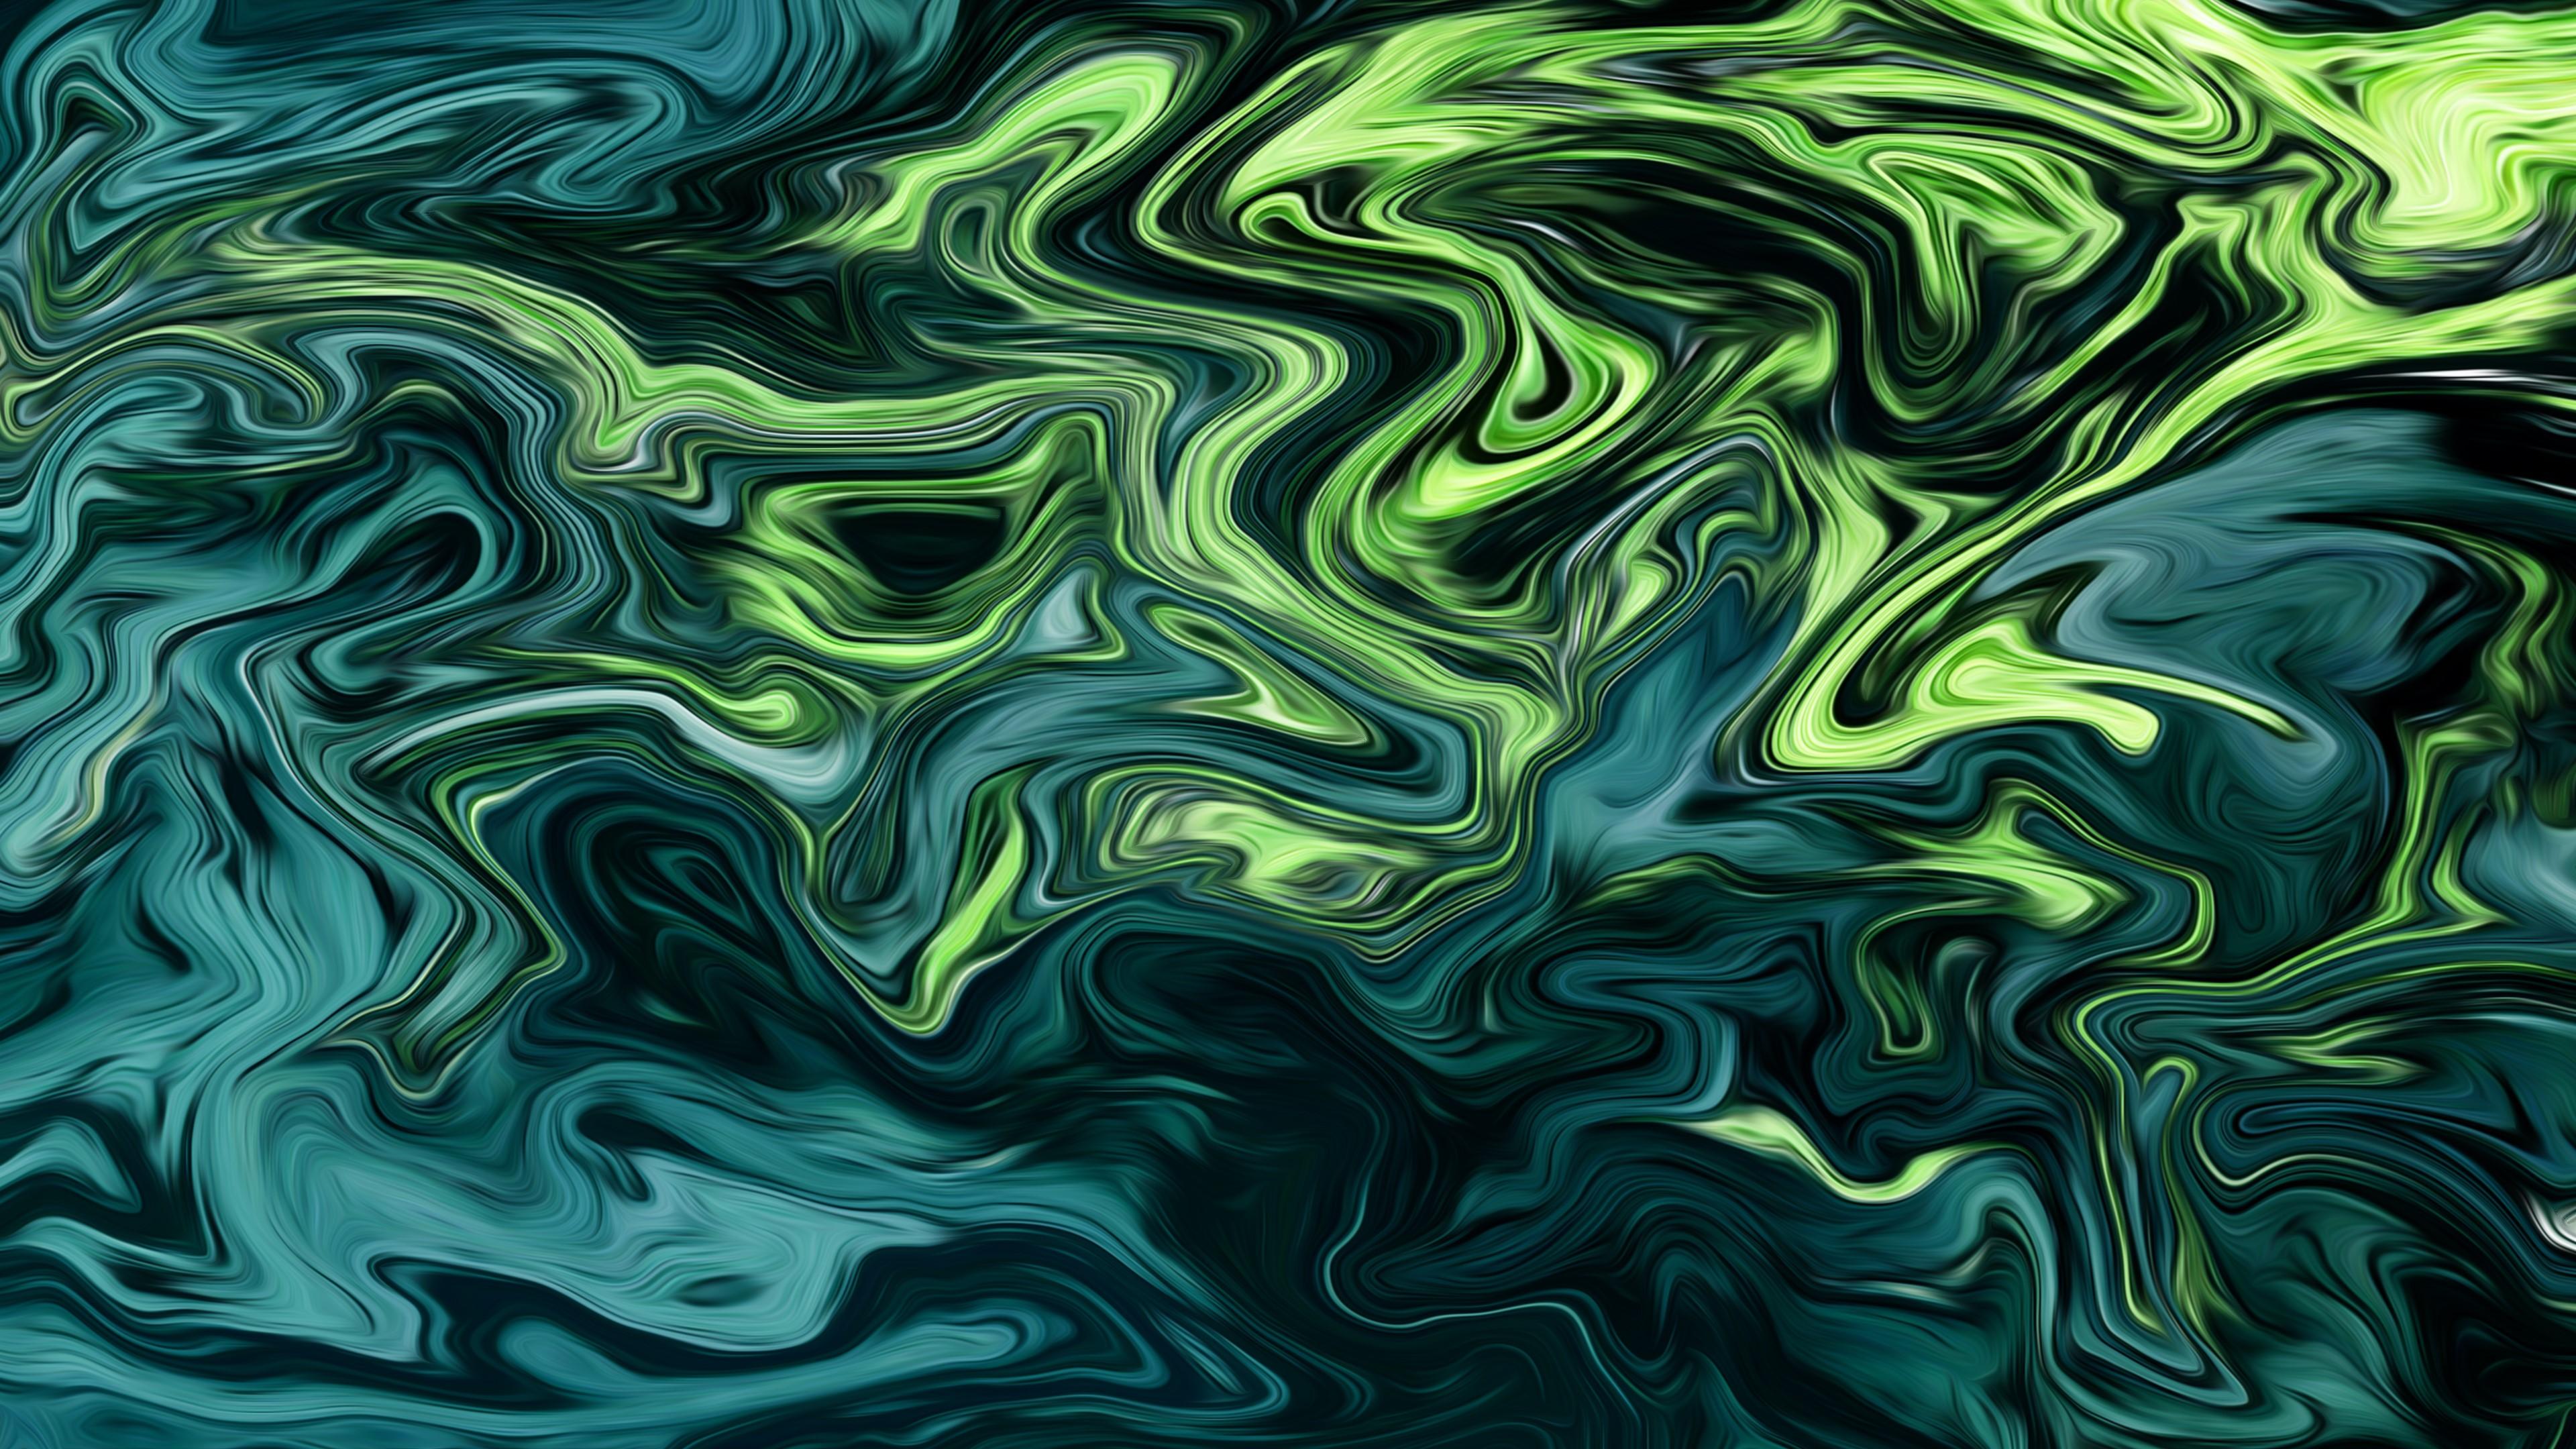 4K Green and Black Abstract Wallpapers - Top Free 4K Green and Black ...